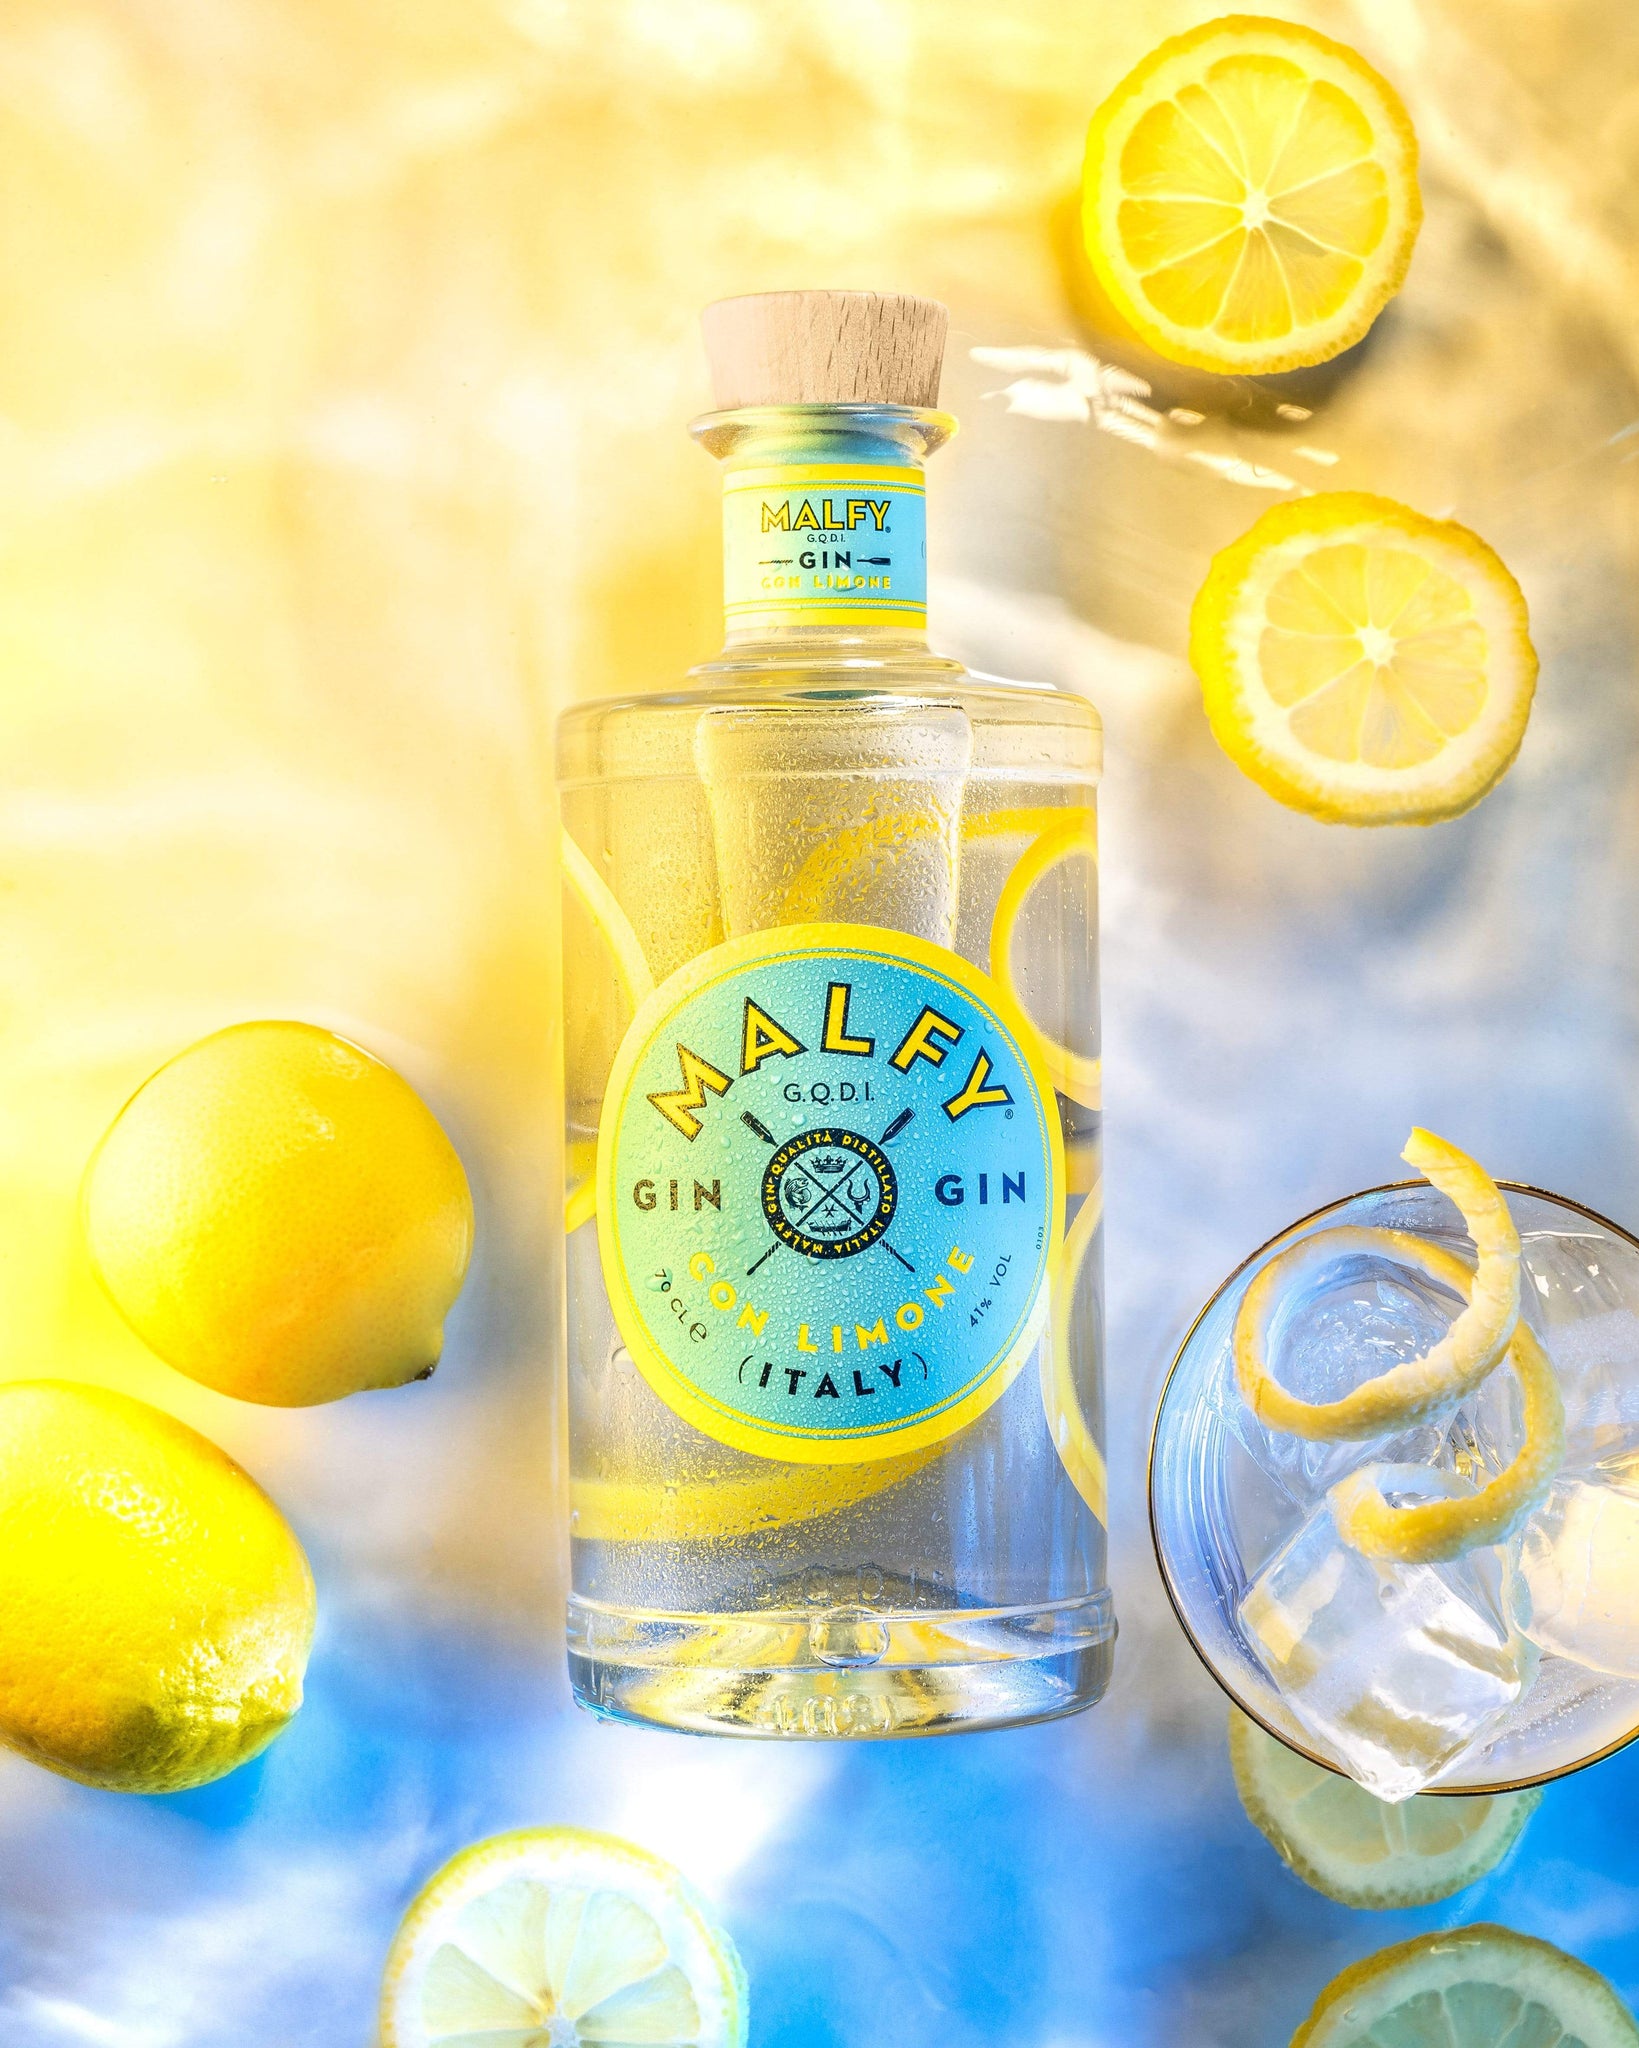 (41%) New Western Dry con Gin Gin - Limone Malfy 0,7l